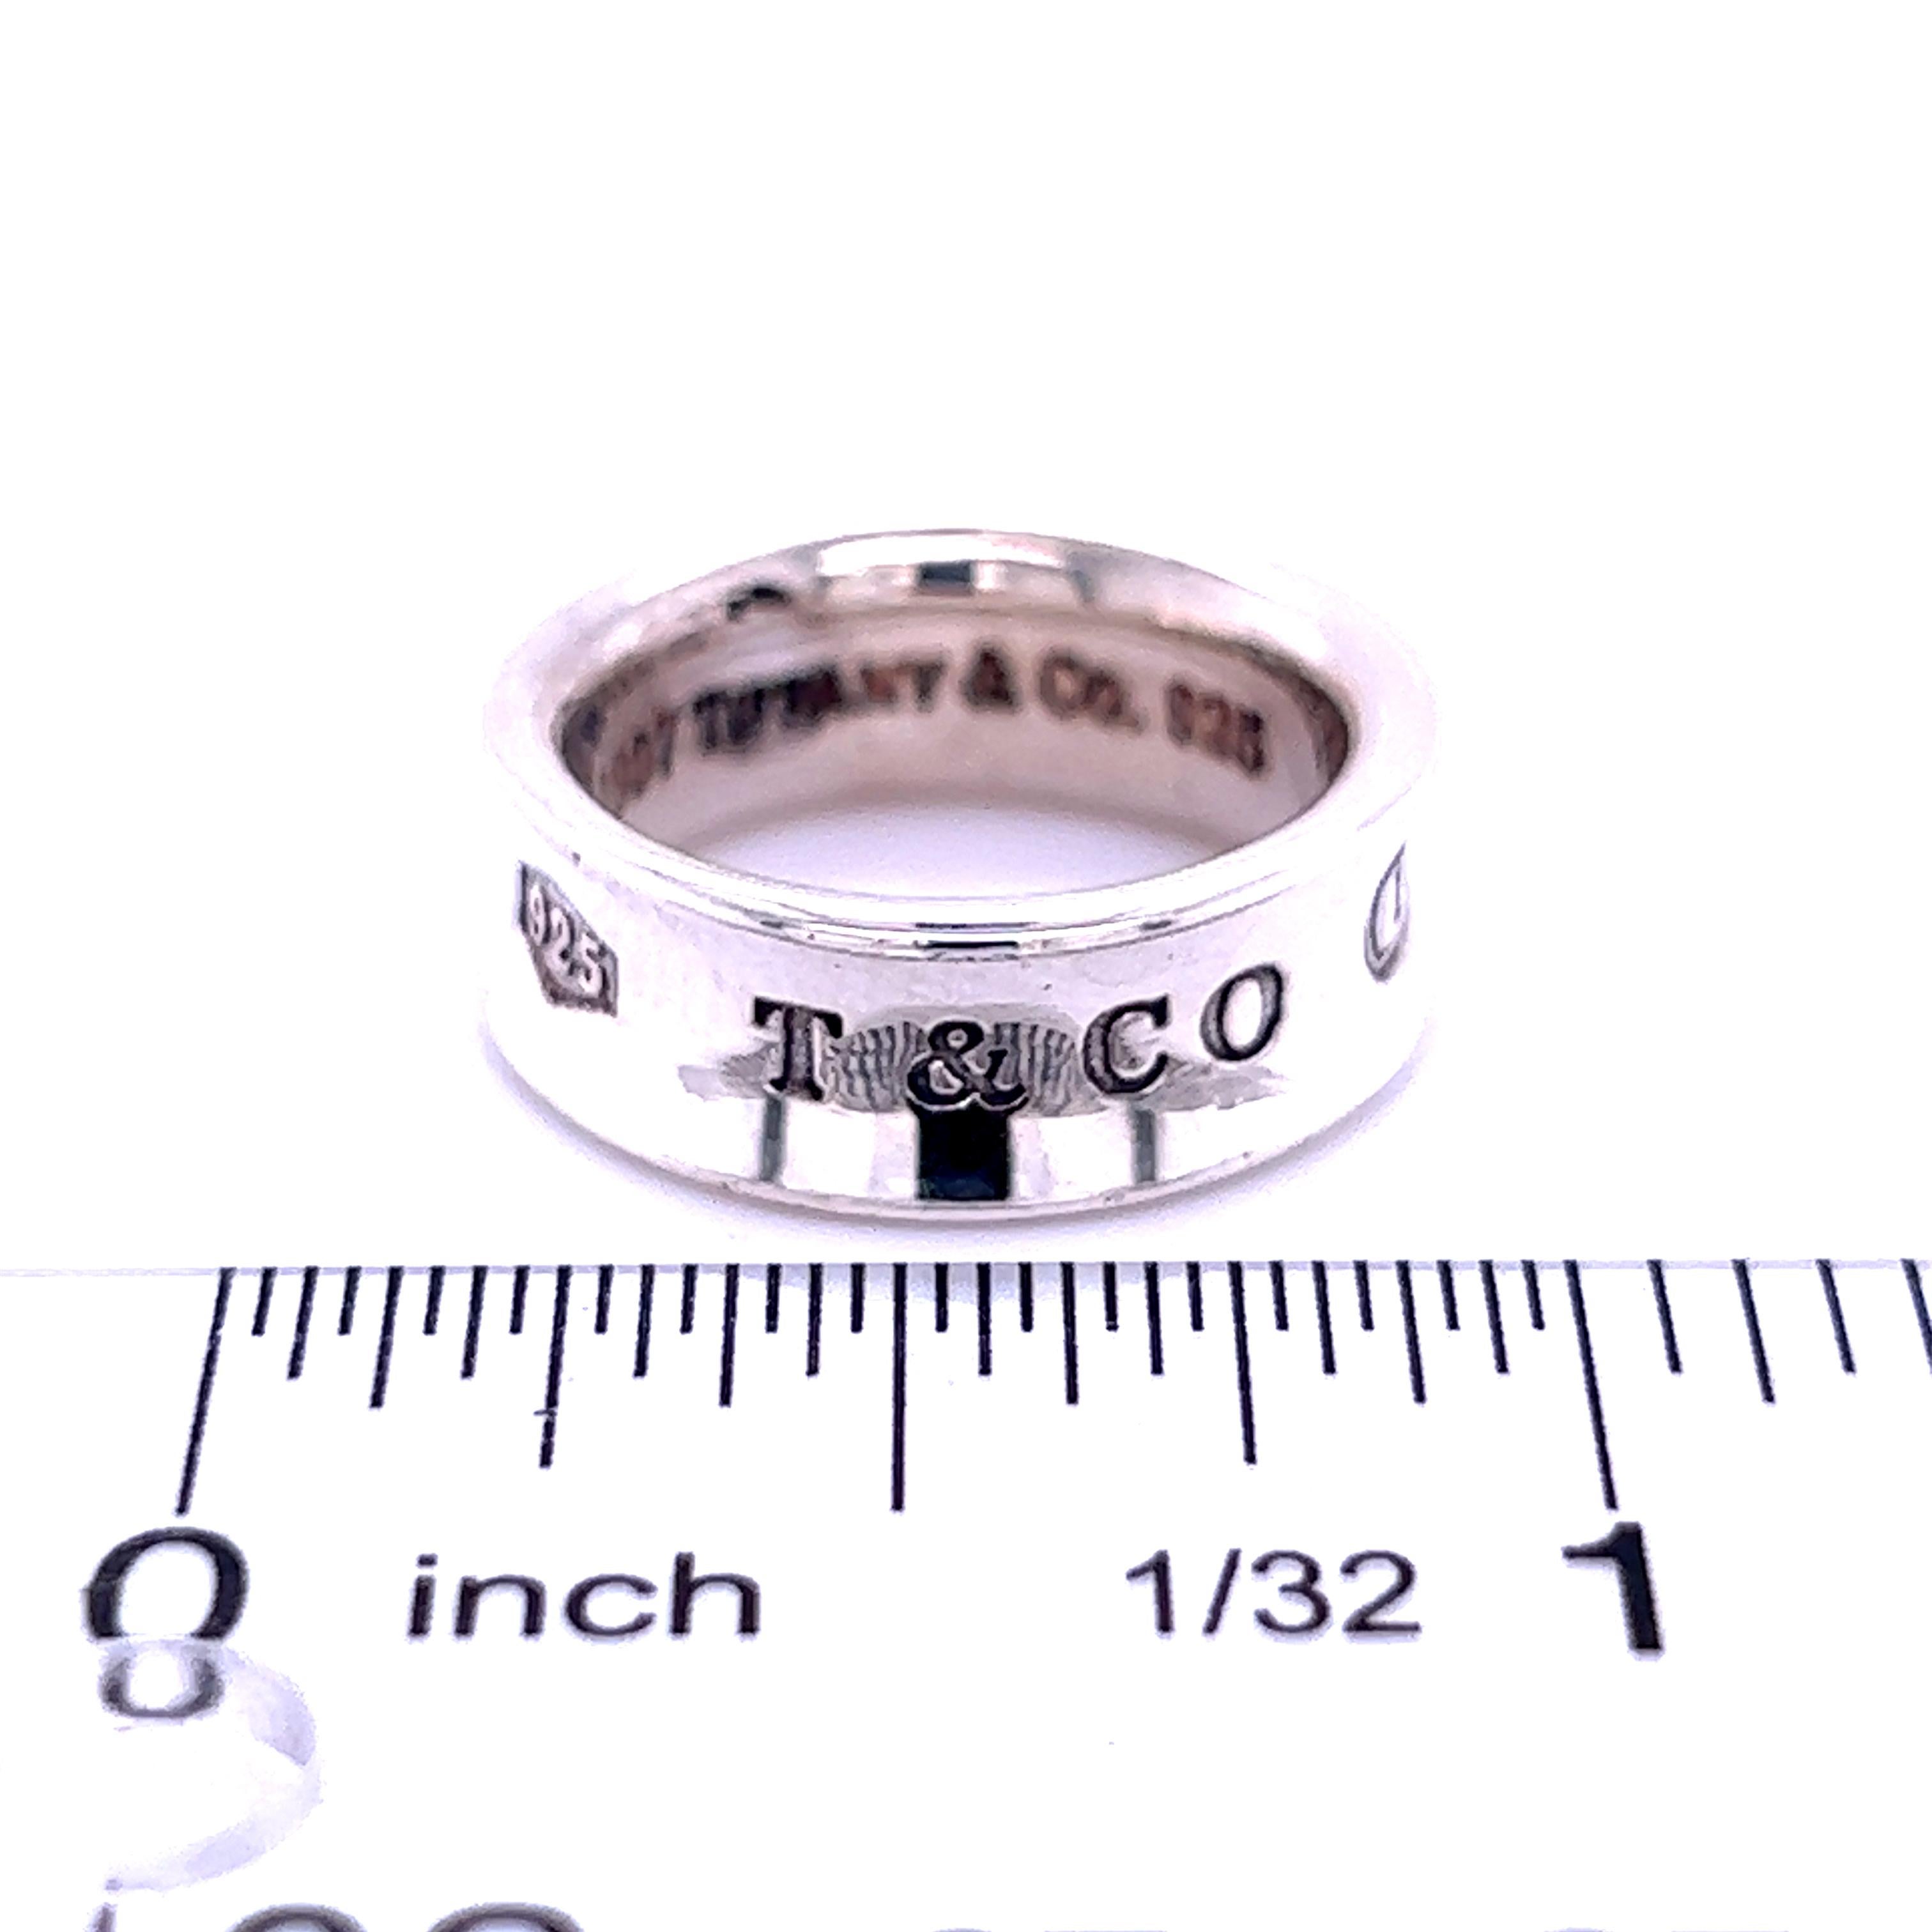 Authentic Tiffany & Co Estate 1837 Concave Band Size 4 Silver 7 mm TIF505

TRUSTED SELLER SINCE 2002

DETAILS
Style: 1837 Concave Band
Ring Size: 4
Height: 7 mm
Weight: 4.1 Grams
Metal: Sterling Silver

We try to present our estate items as best as